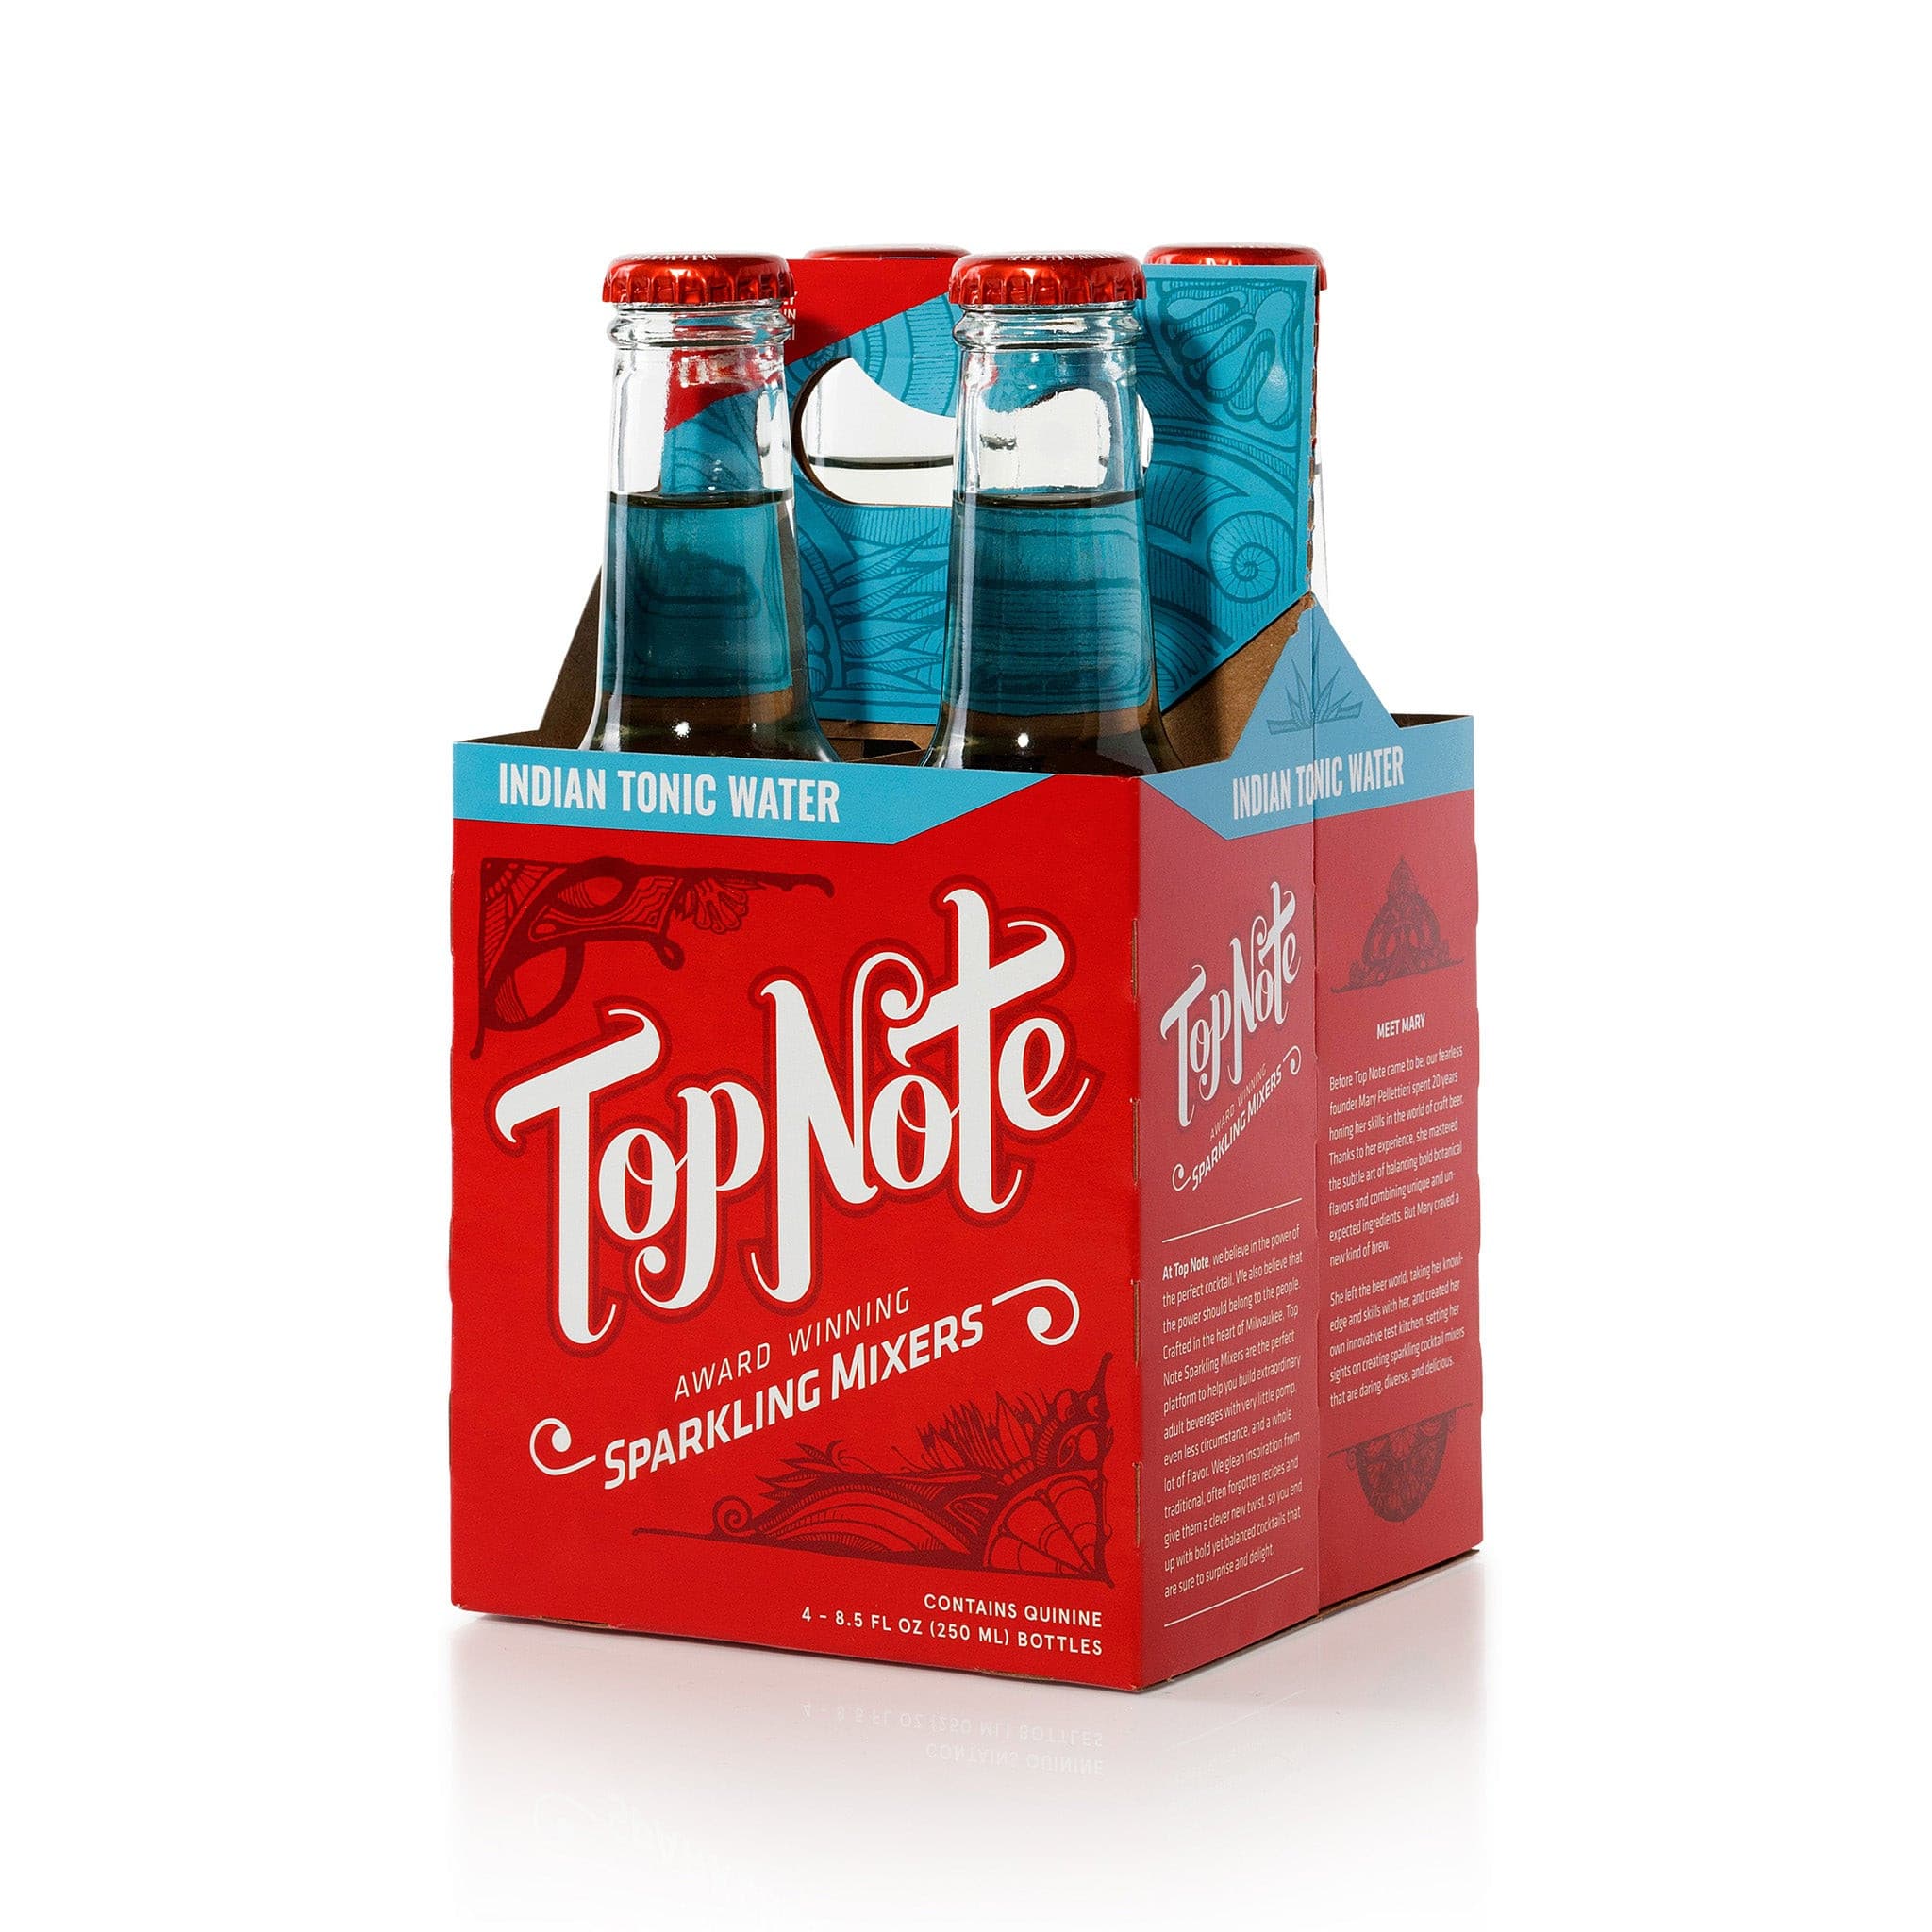 16 Pack Indian Tonic Water, sofi Award winner! by Top Note Tonic Store